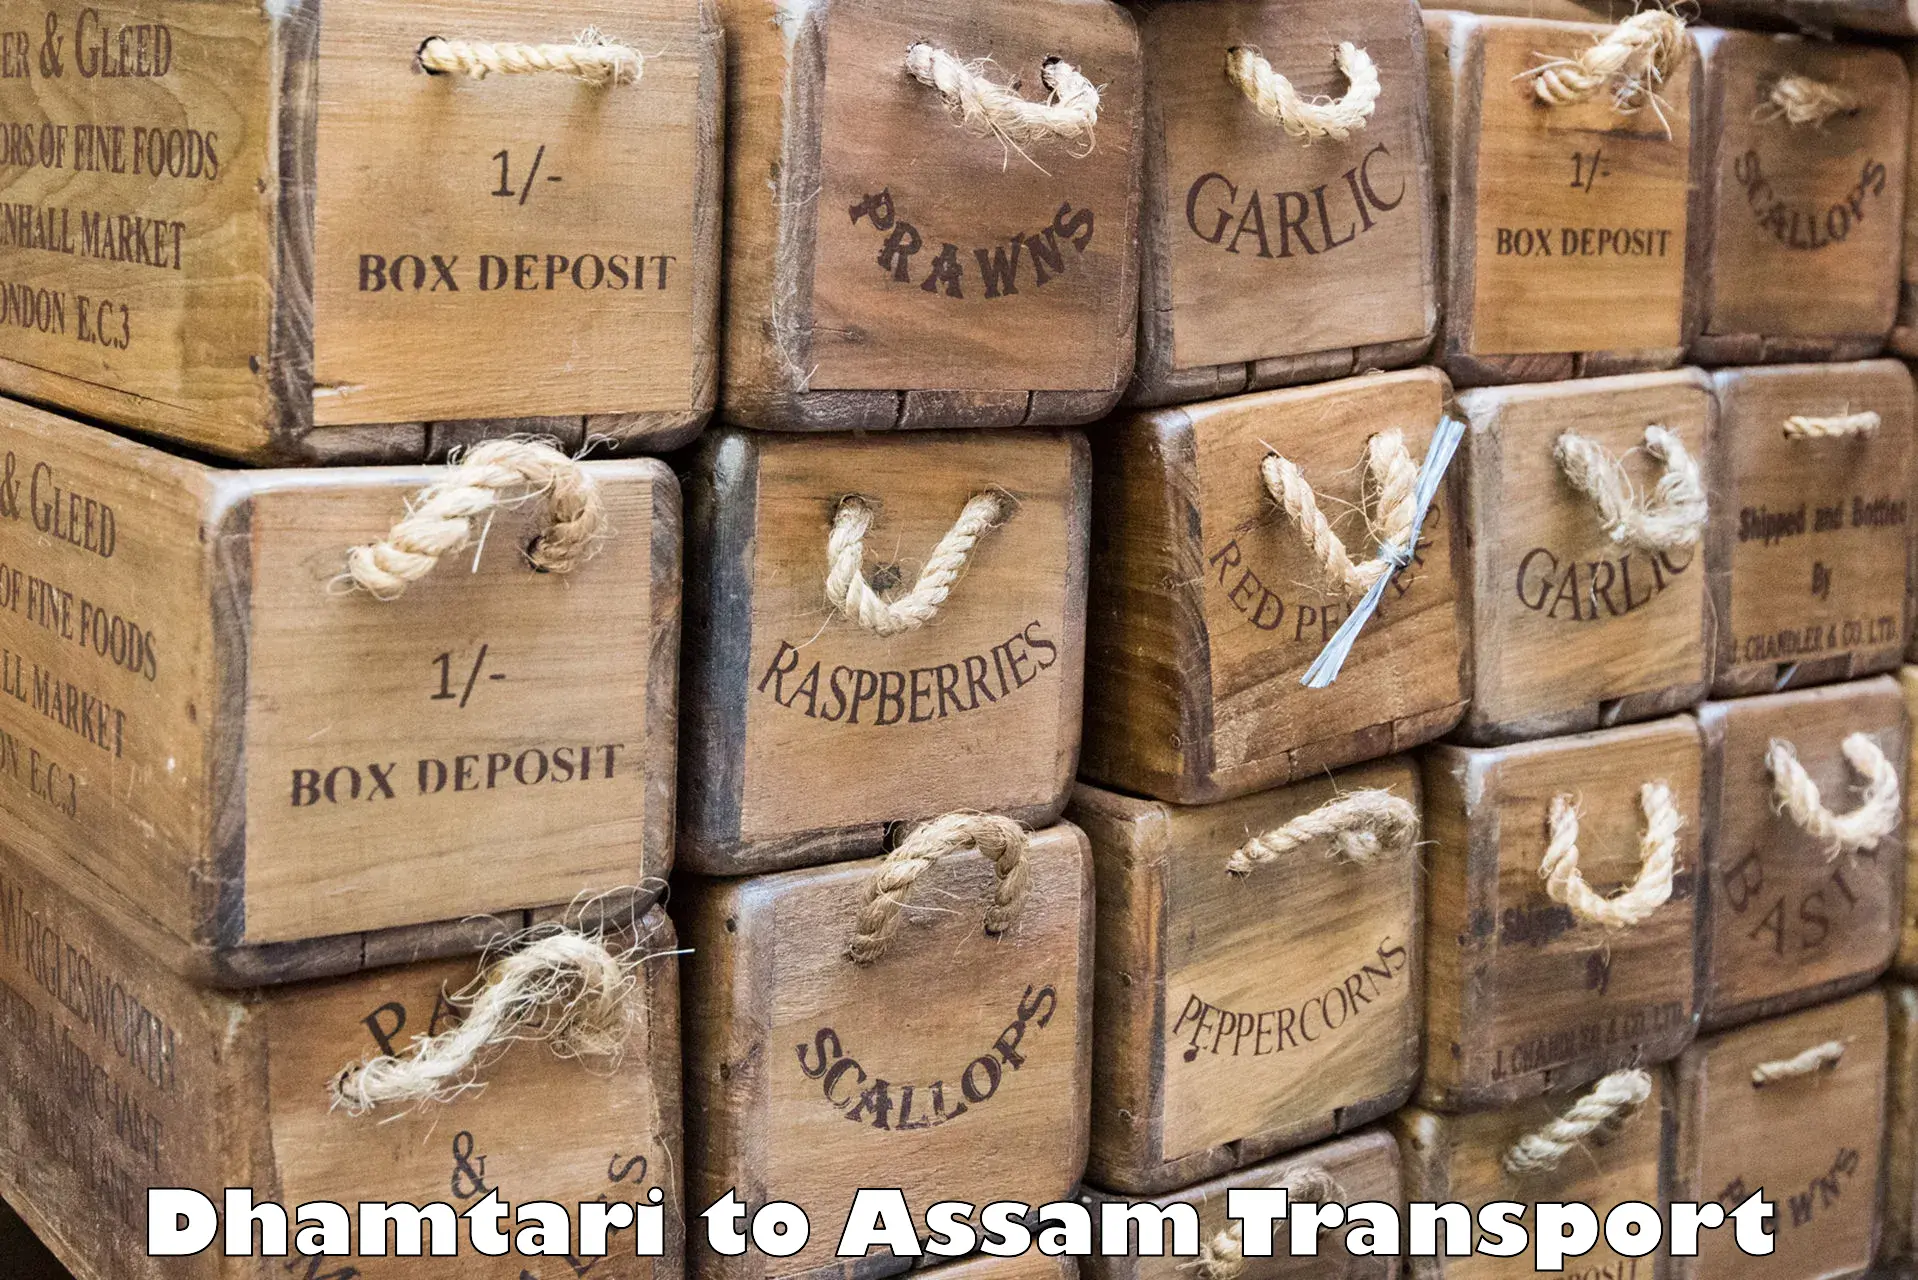 Container transport service Dhamtari to Assam